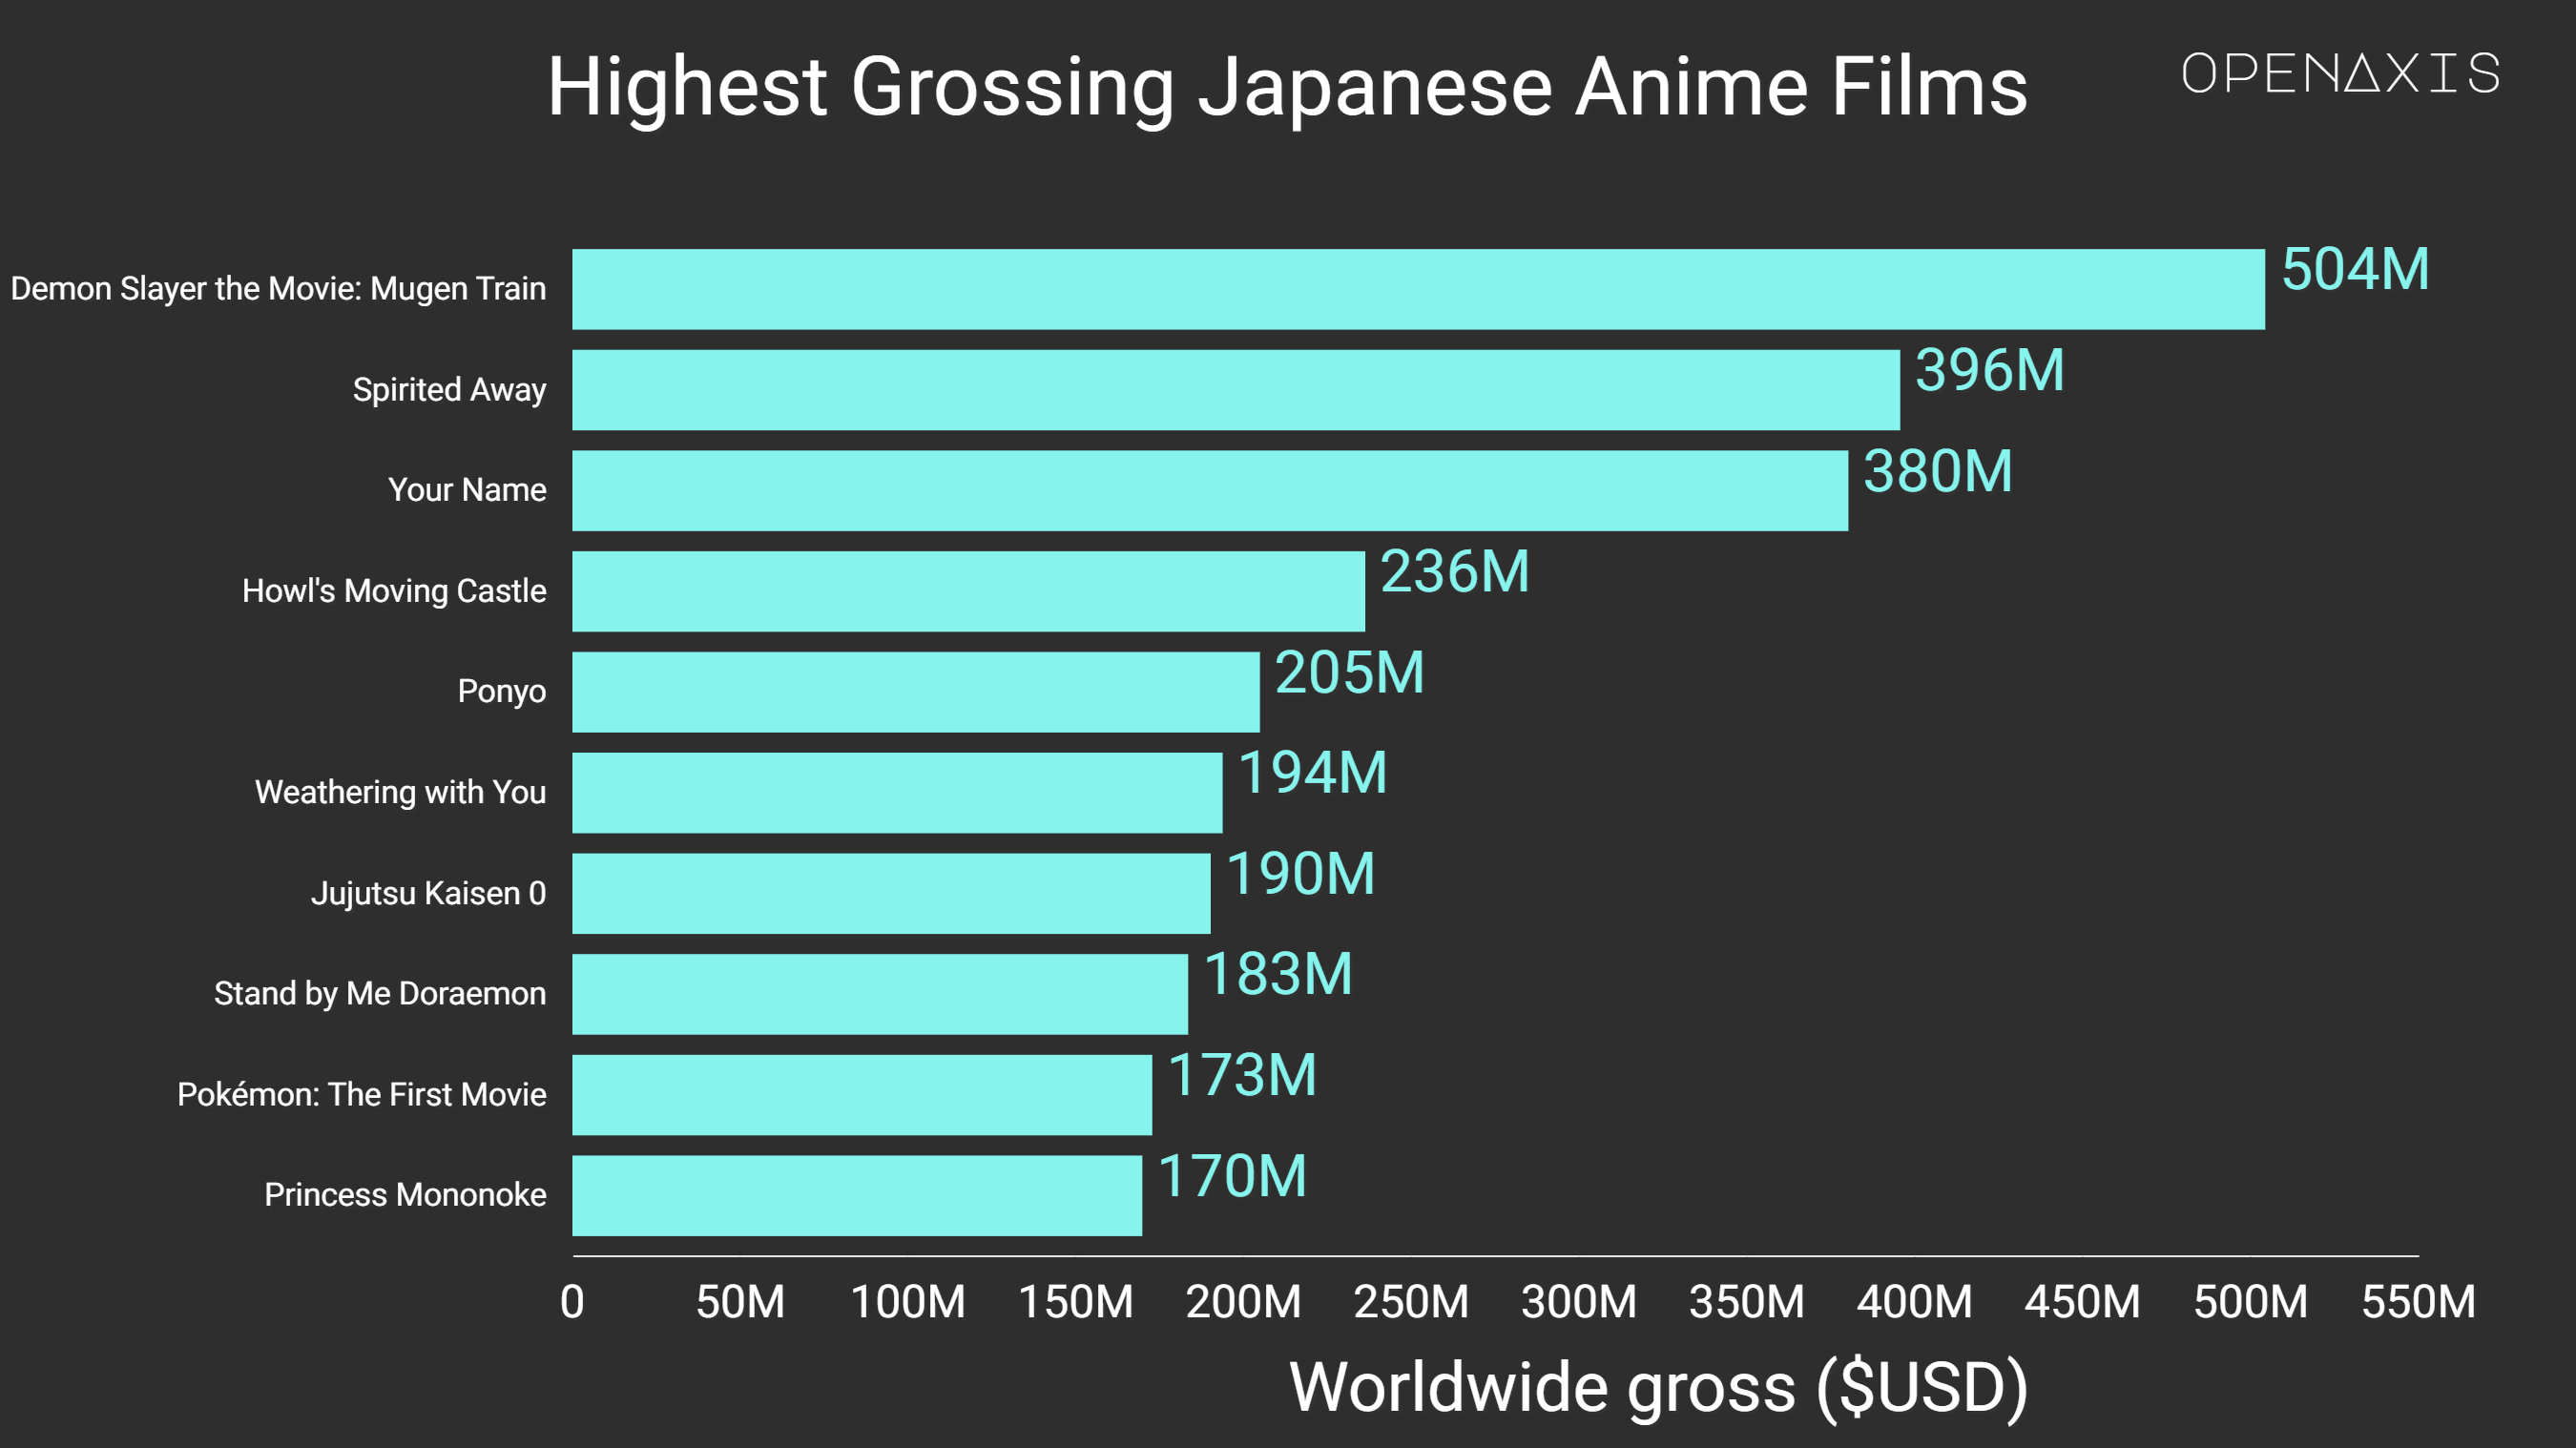 <p>Films made in Japan produce revenue through various sources; the lists below only consider box office earnings at cinemas, not other sources of income such as merchandising or home video. </p><p><br /></p><p>The lists include both anime and live-action films produced by Japanese studios, but do not include English-language international co-productions between Japanese and Hollywood studios (for example, a number of Hollywood films based on Japanese source material were co‑produced with Japanese production companies).</p><p><br /></p><p><span data-index="0" data-denotation-char data-id="0" data-value="&lt;a href=&quot;/search?q=%23anime&quot; target=_self&gt;#anime" data-link="/search?q=%23anime">﻿<span contenteditable="false"><span></span><a href="/search?q=%23anime" target="_self">#anime</a></span>﻿</span> <span data-index="0" data-denotation-char data-id="0" data-value="&lt;a href=&quot;/search?q=%23entertainment&quot; target=_self&gt;#entertainment" data-link="/search?q=%23entertainment">﻿<span contenteditable="false"><span></span><a href="/search?q=%23entertainment" target="_self">#entertainment</a></span>﻿</span></p><p><br /></p><p>Source: <a href="/data/4020" target="_blank">Wikipedia</a></p><p><br /></p>